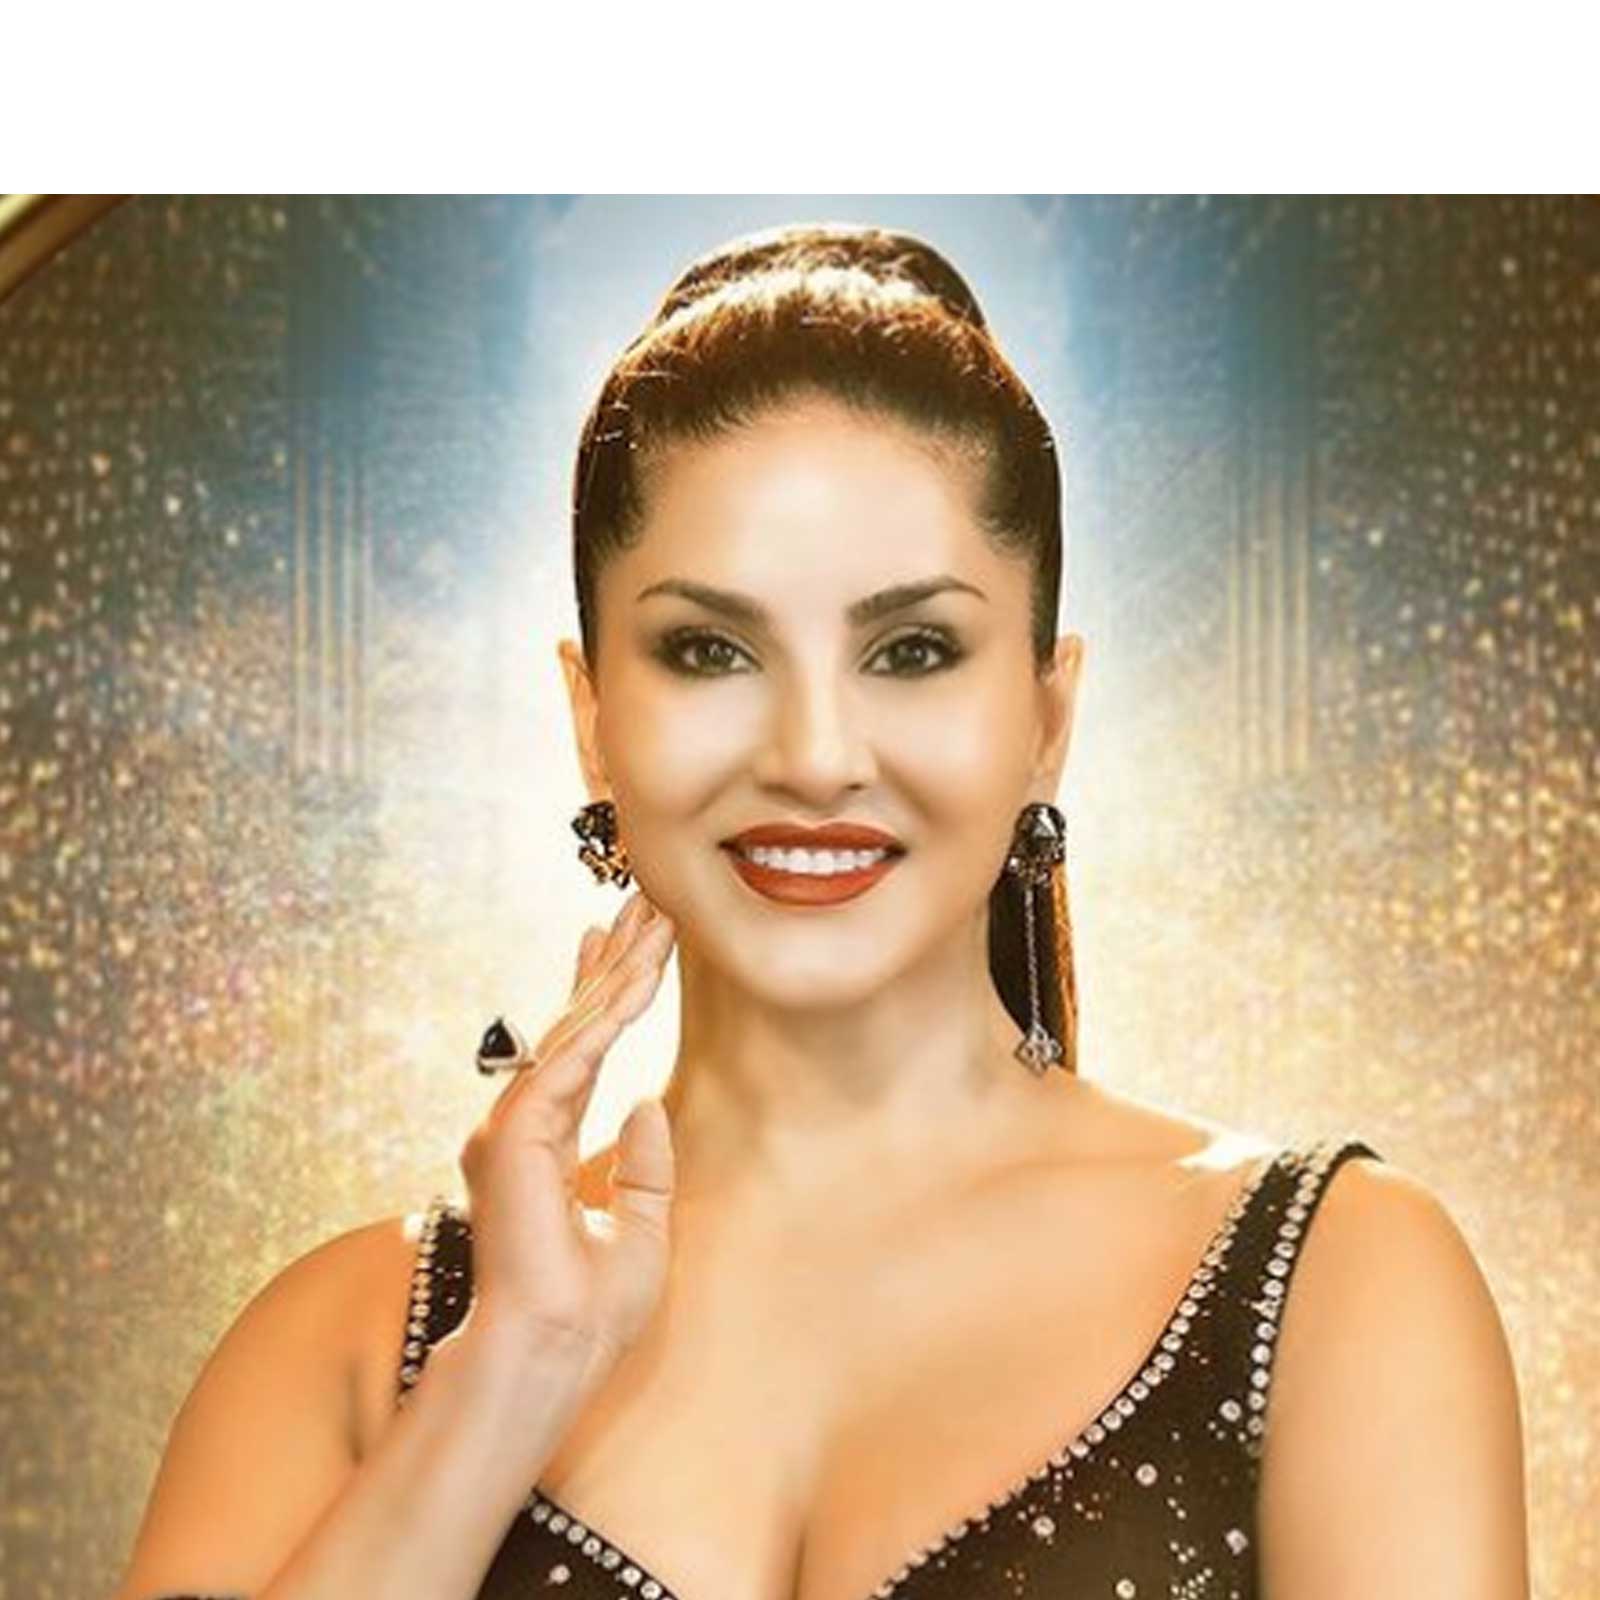 Raped By Sunny Leone Sex Videos - 5 Times Sunny Leone Got Tangled in Controversies - News18